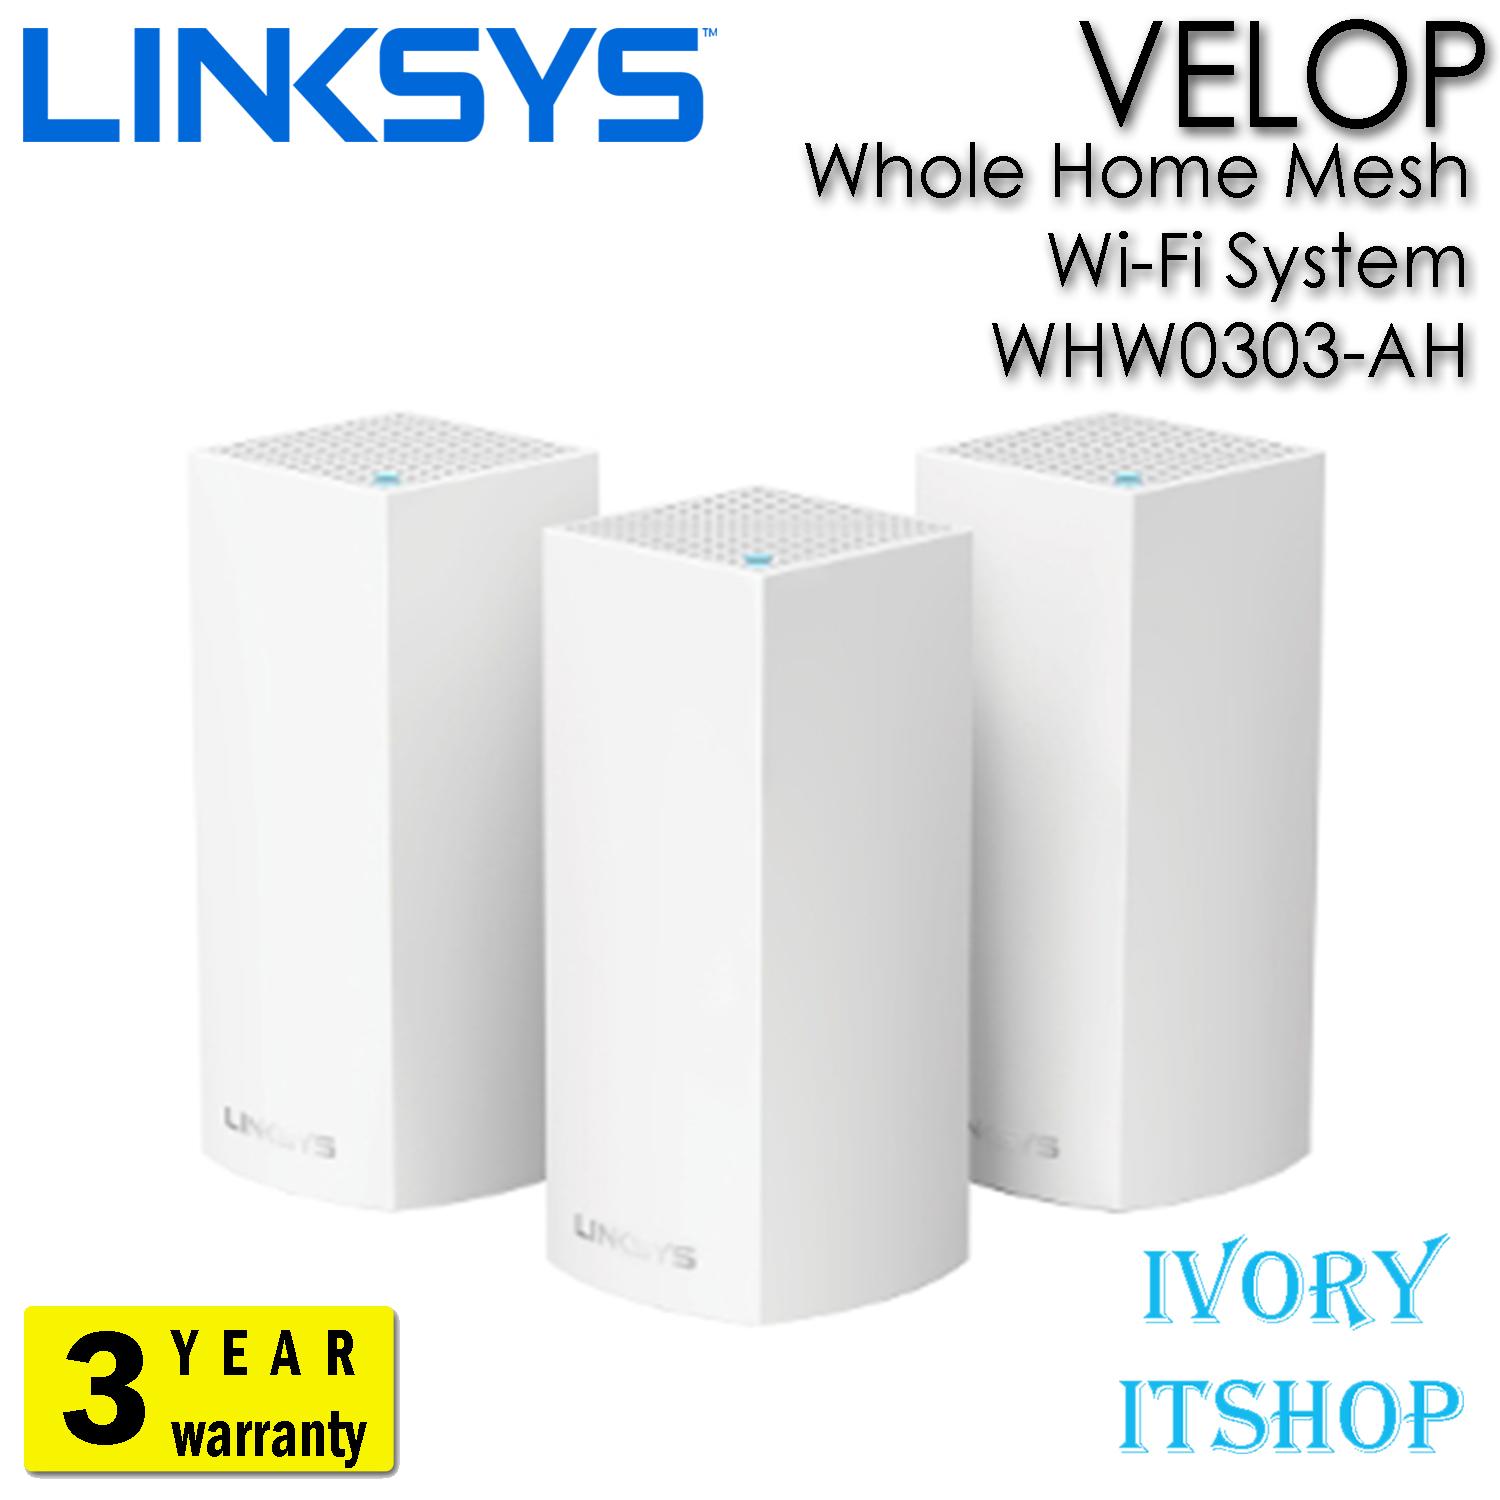 WHW0303-AH VELOP Whole Home Mesh Wi-Fi System/ivoryitshop